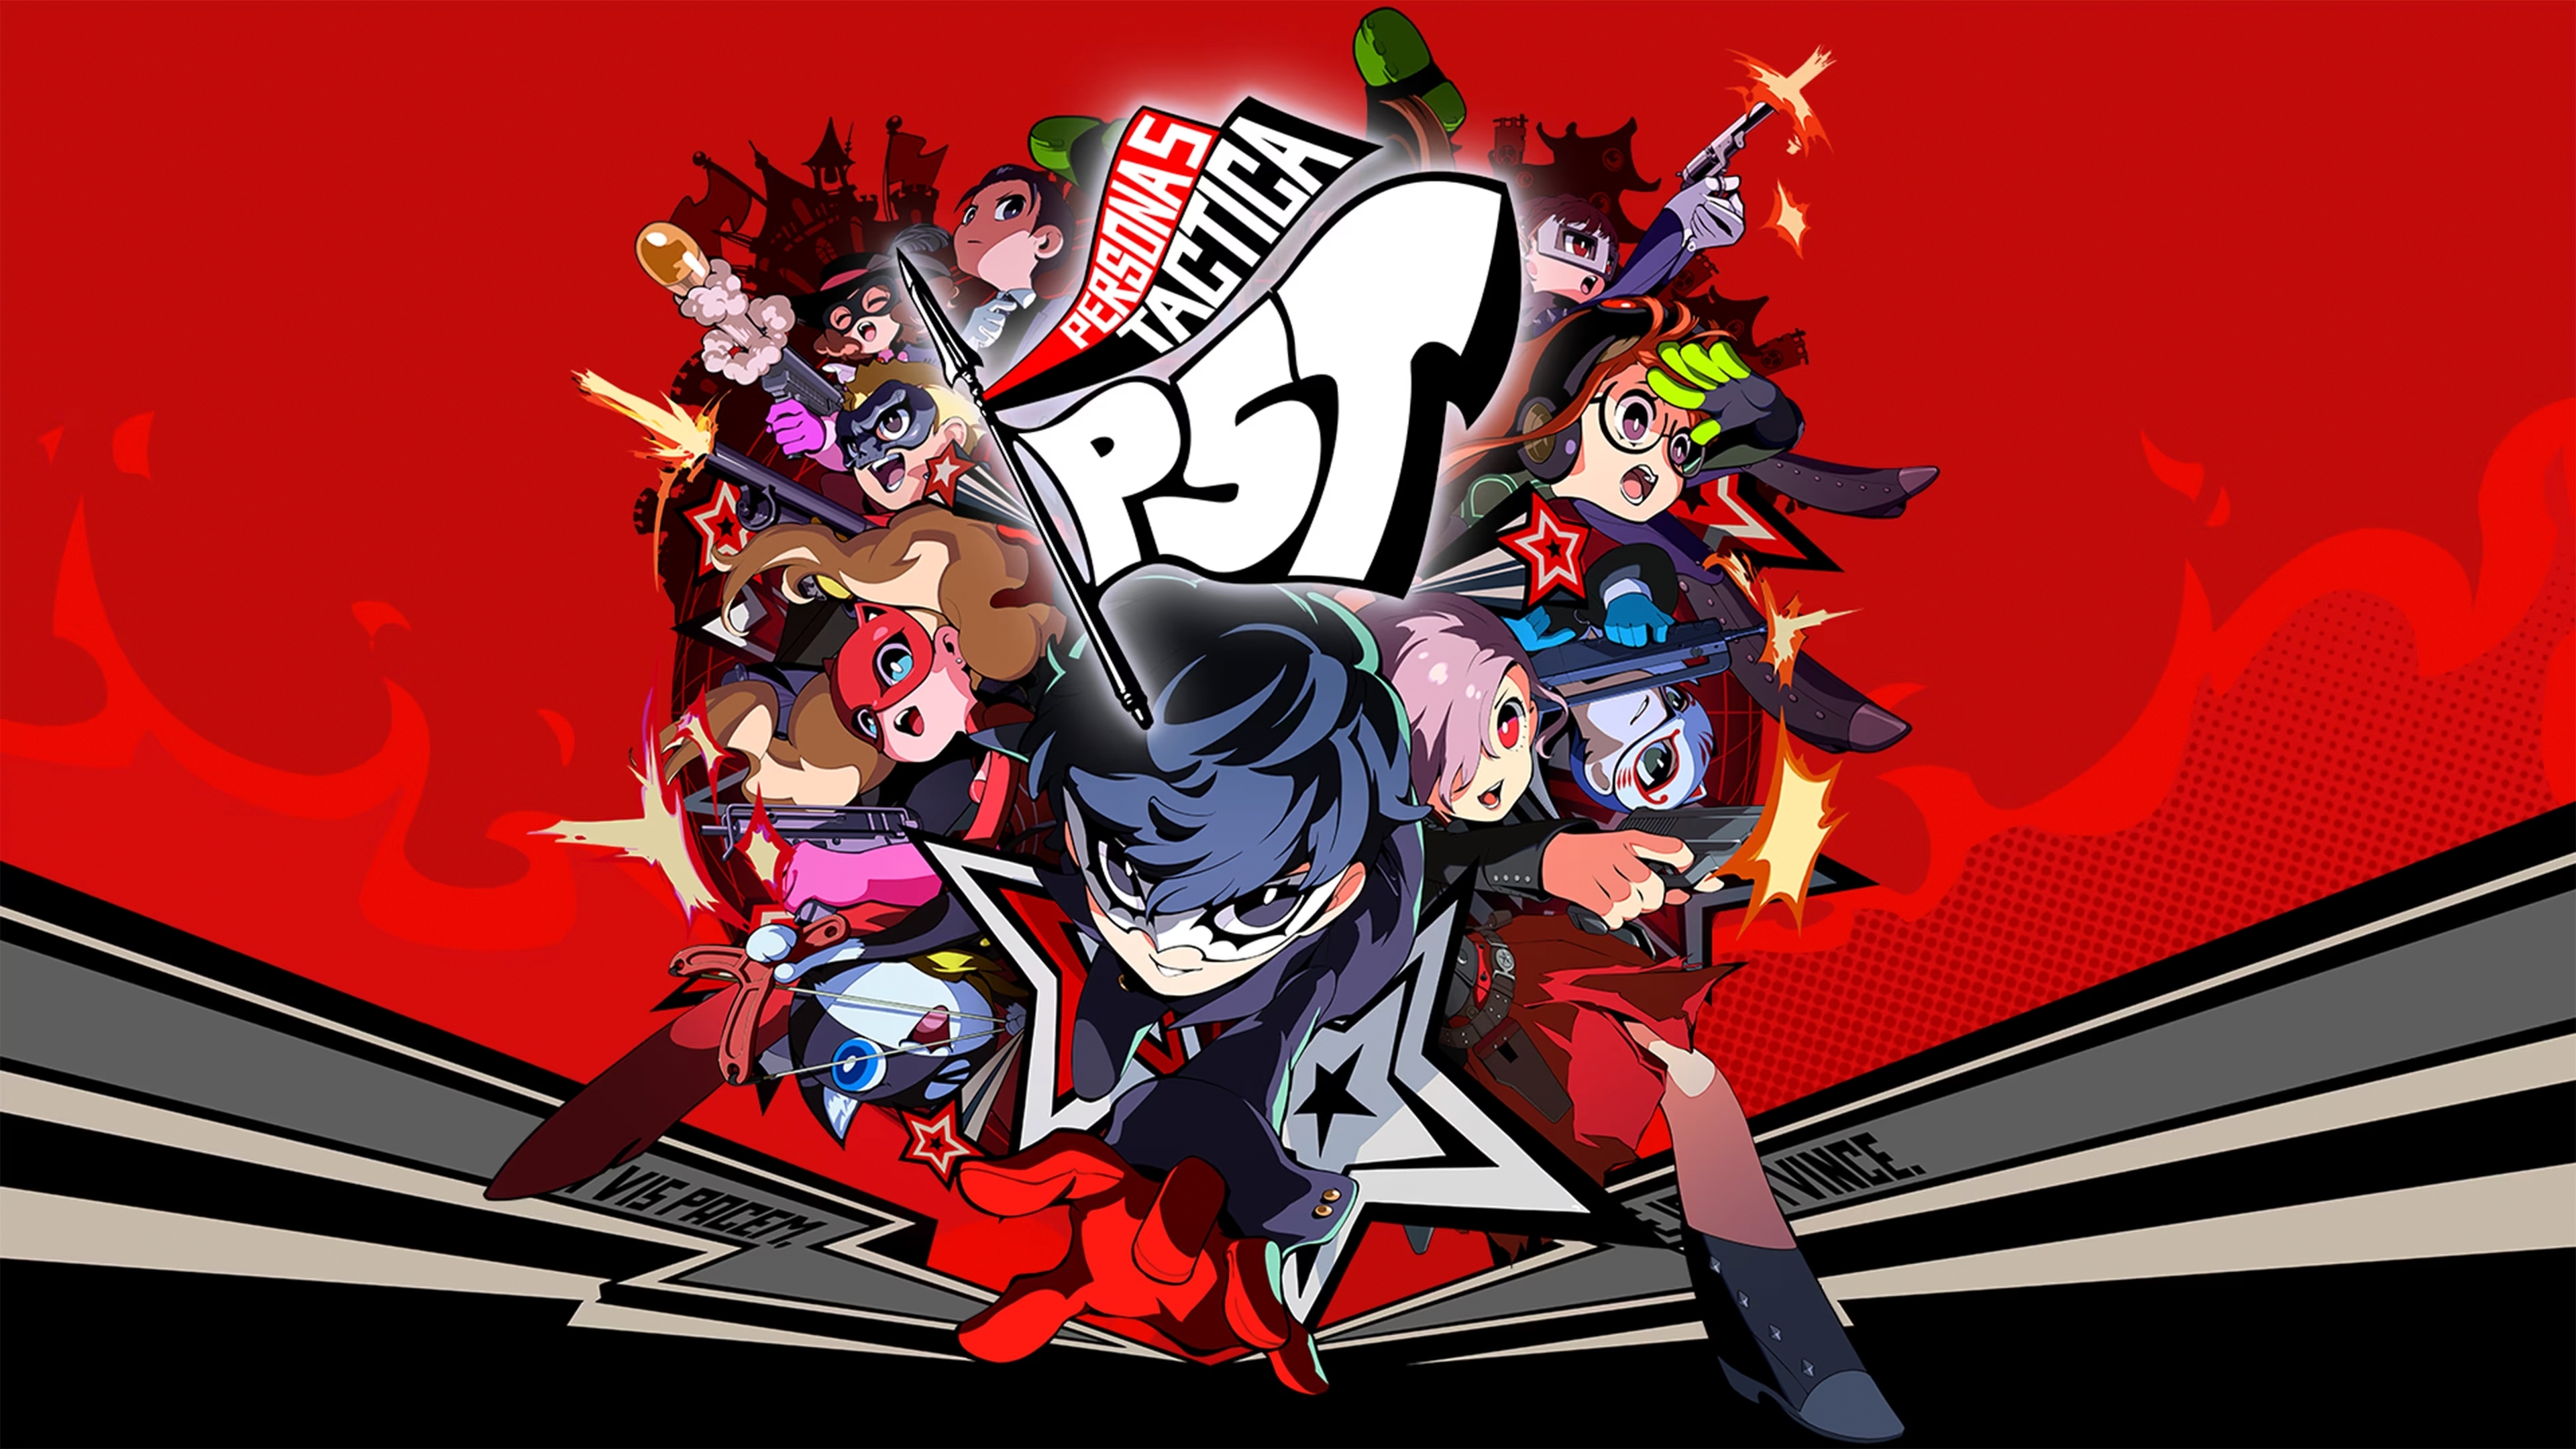 Persona 5 The Royal Due in 2020, Will Introduce New Character